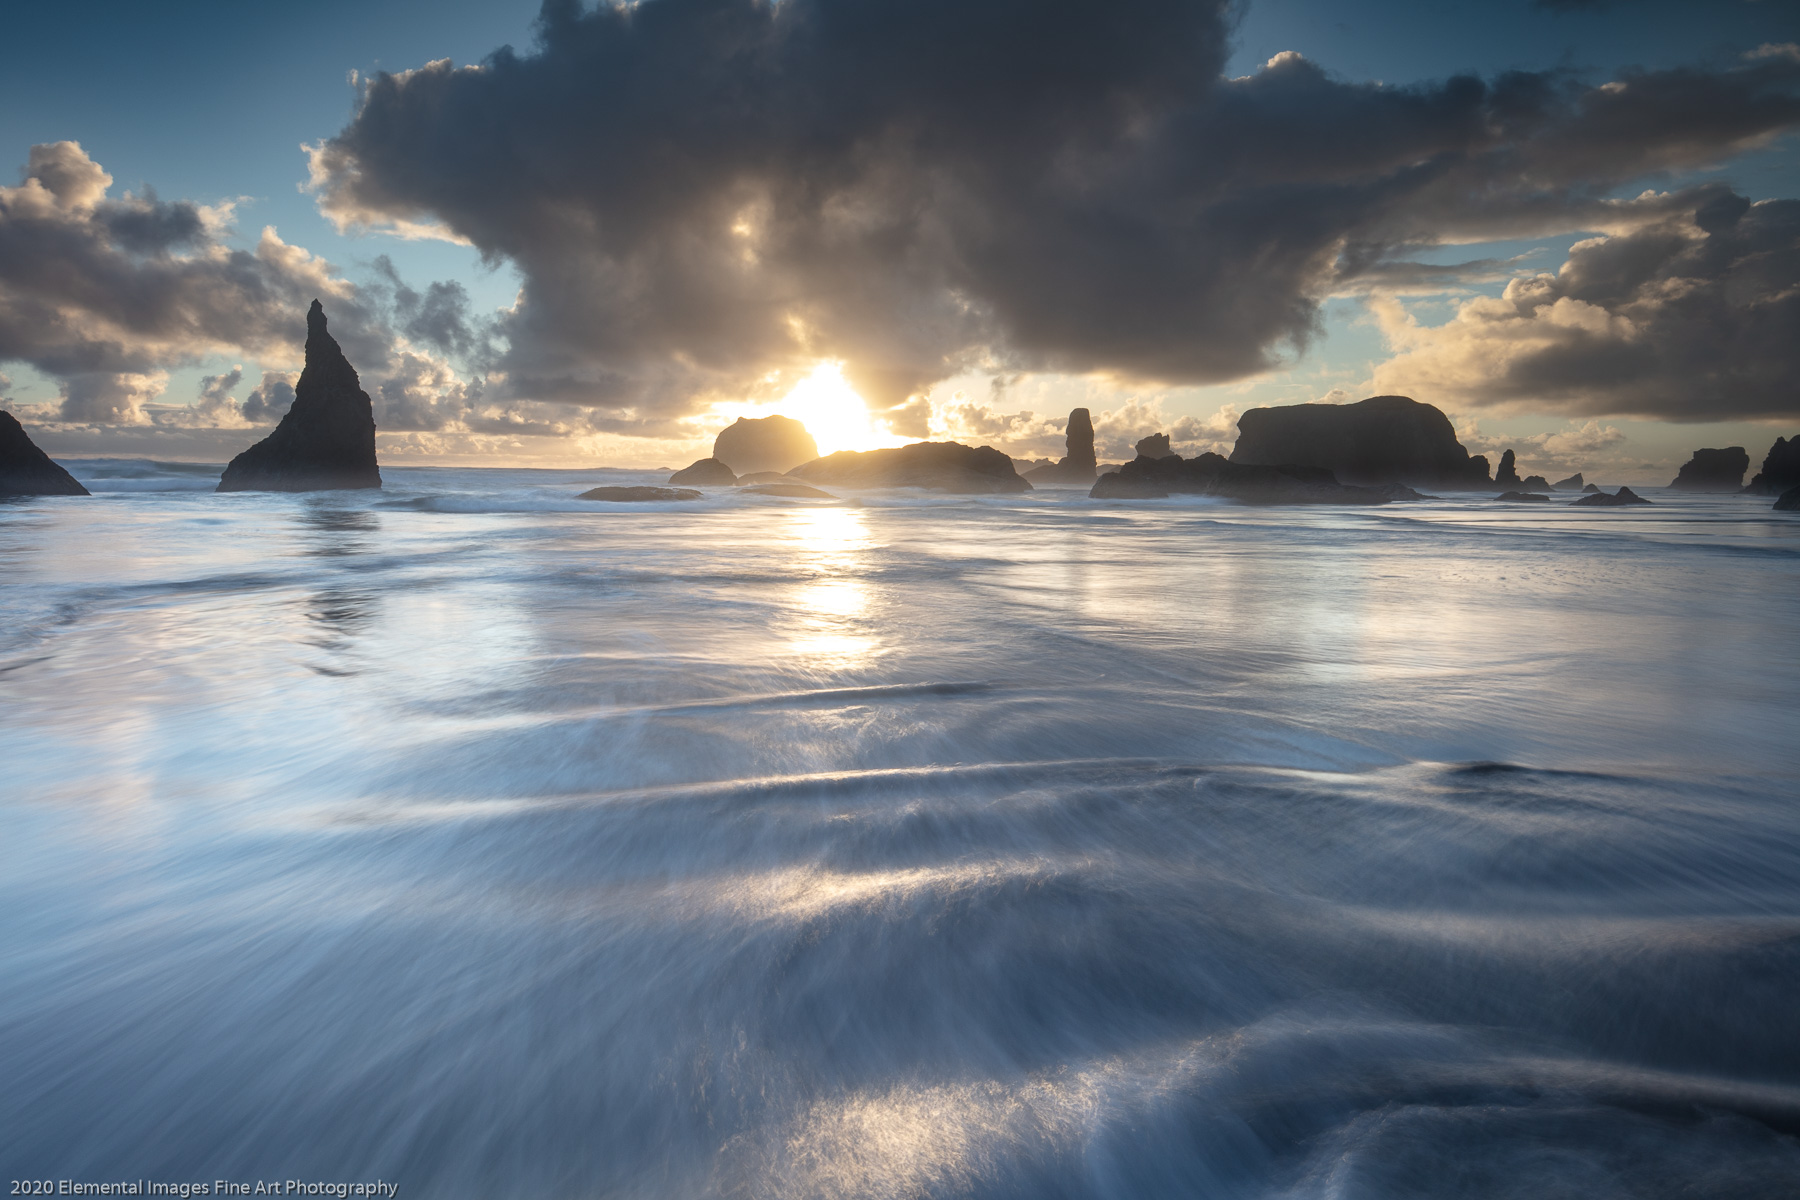 Wave Pattern and Evening Light | Bandon | OR | USA - © 2020 Elemental Images Fine Art Photography - All Rights Reserved Worldwide